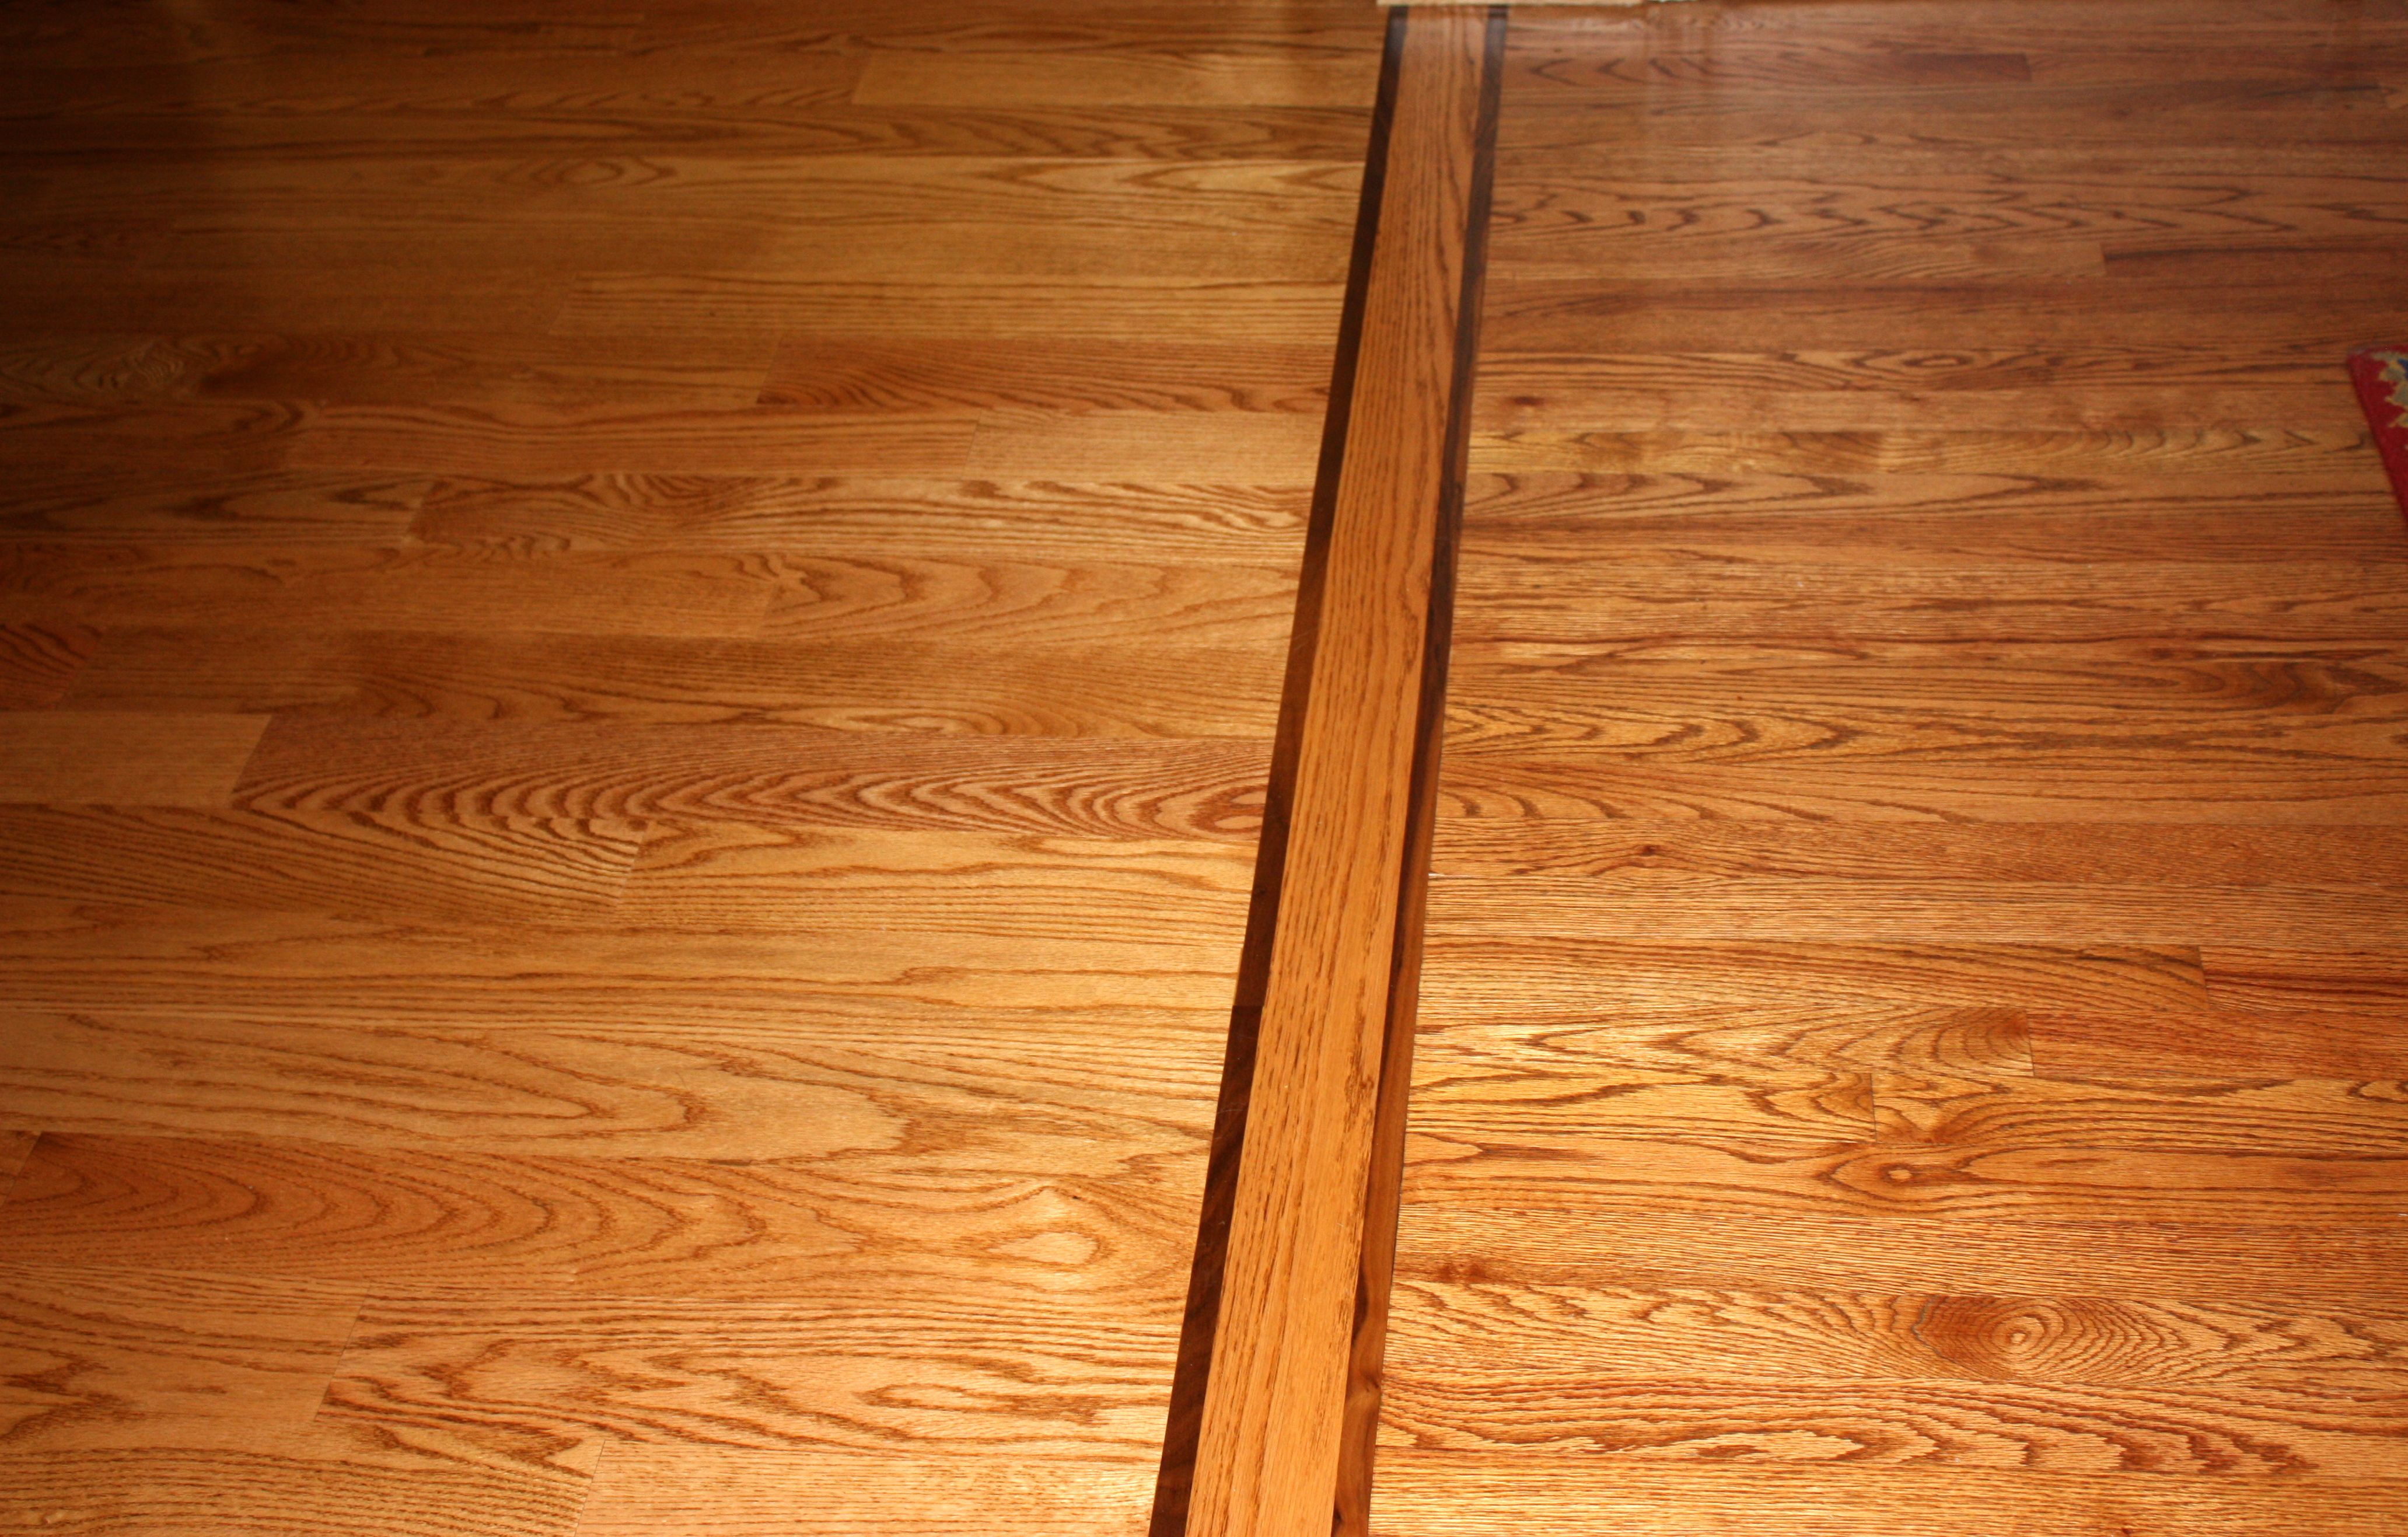 Matching An Existing Hardwood Floor, How To Match Laminate Flooring